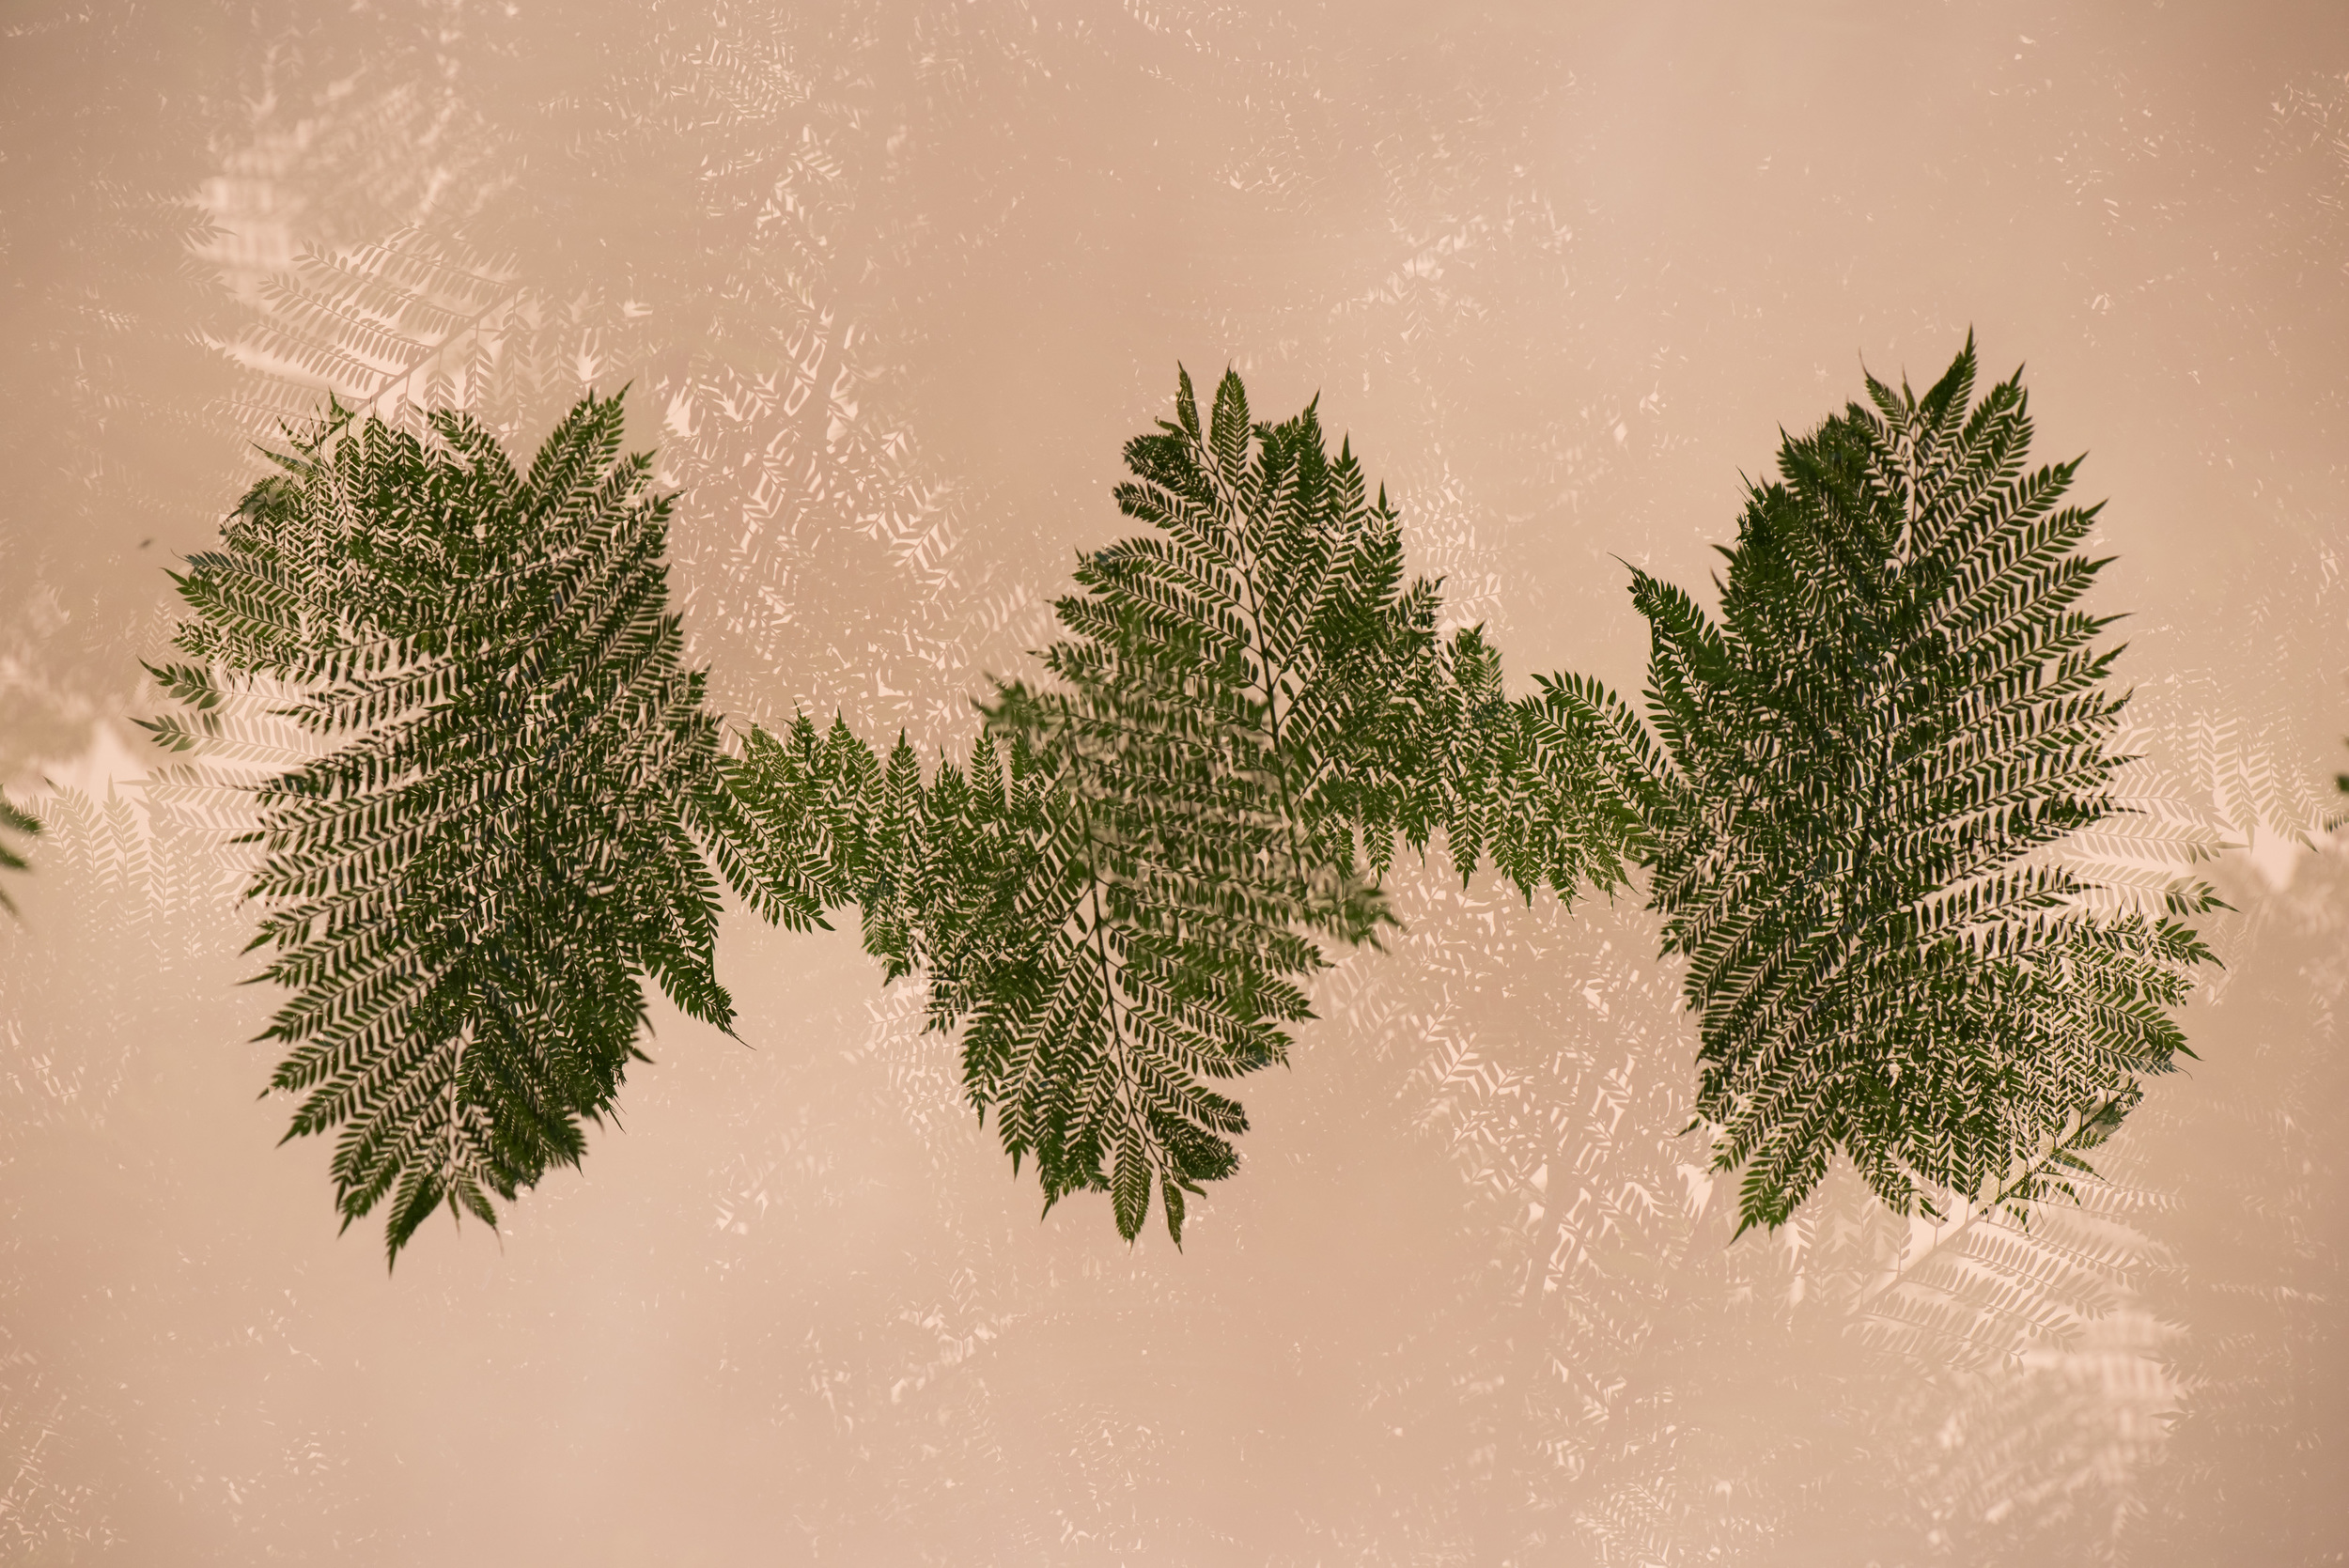   Leaves II , 2016 Archival pigment print 27x40 Inches 